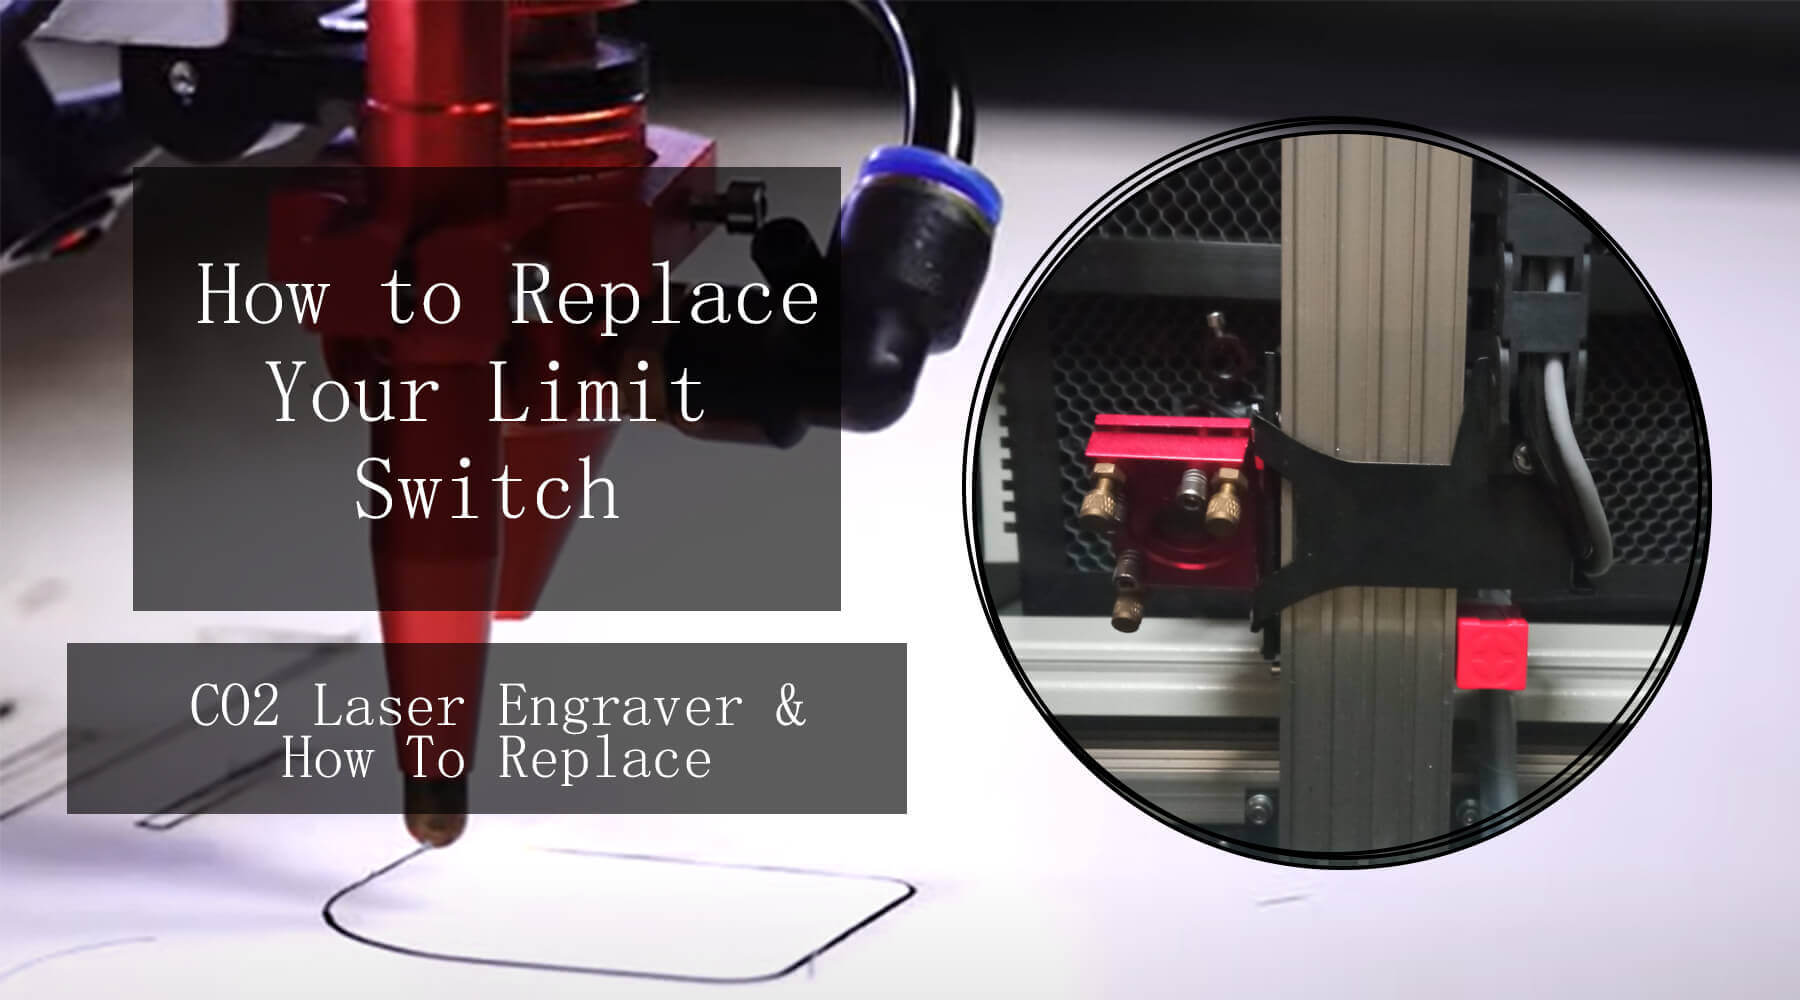 How to Replace Your Limit Switch